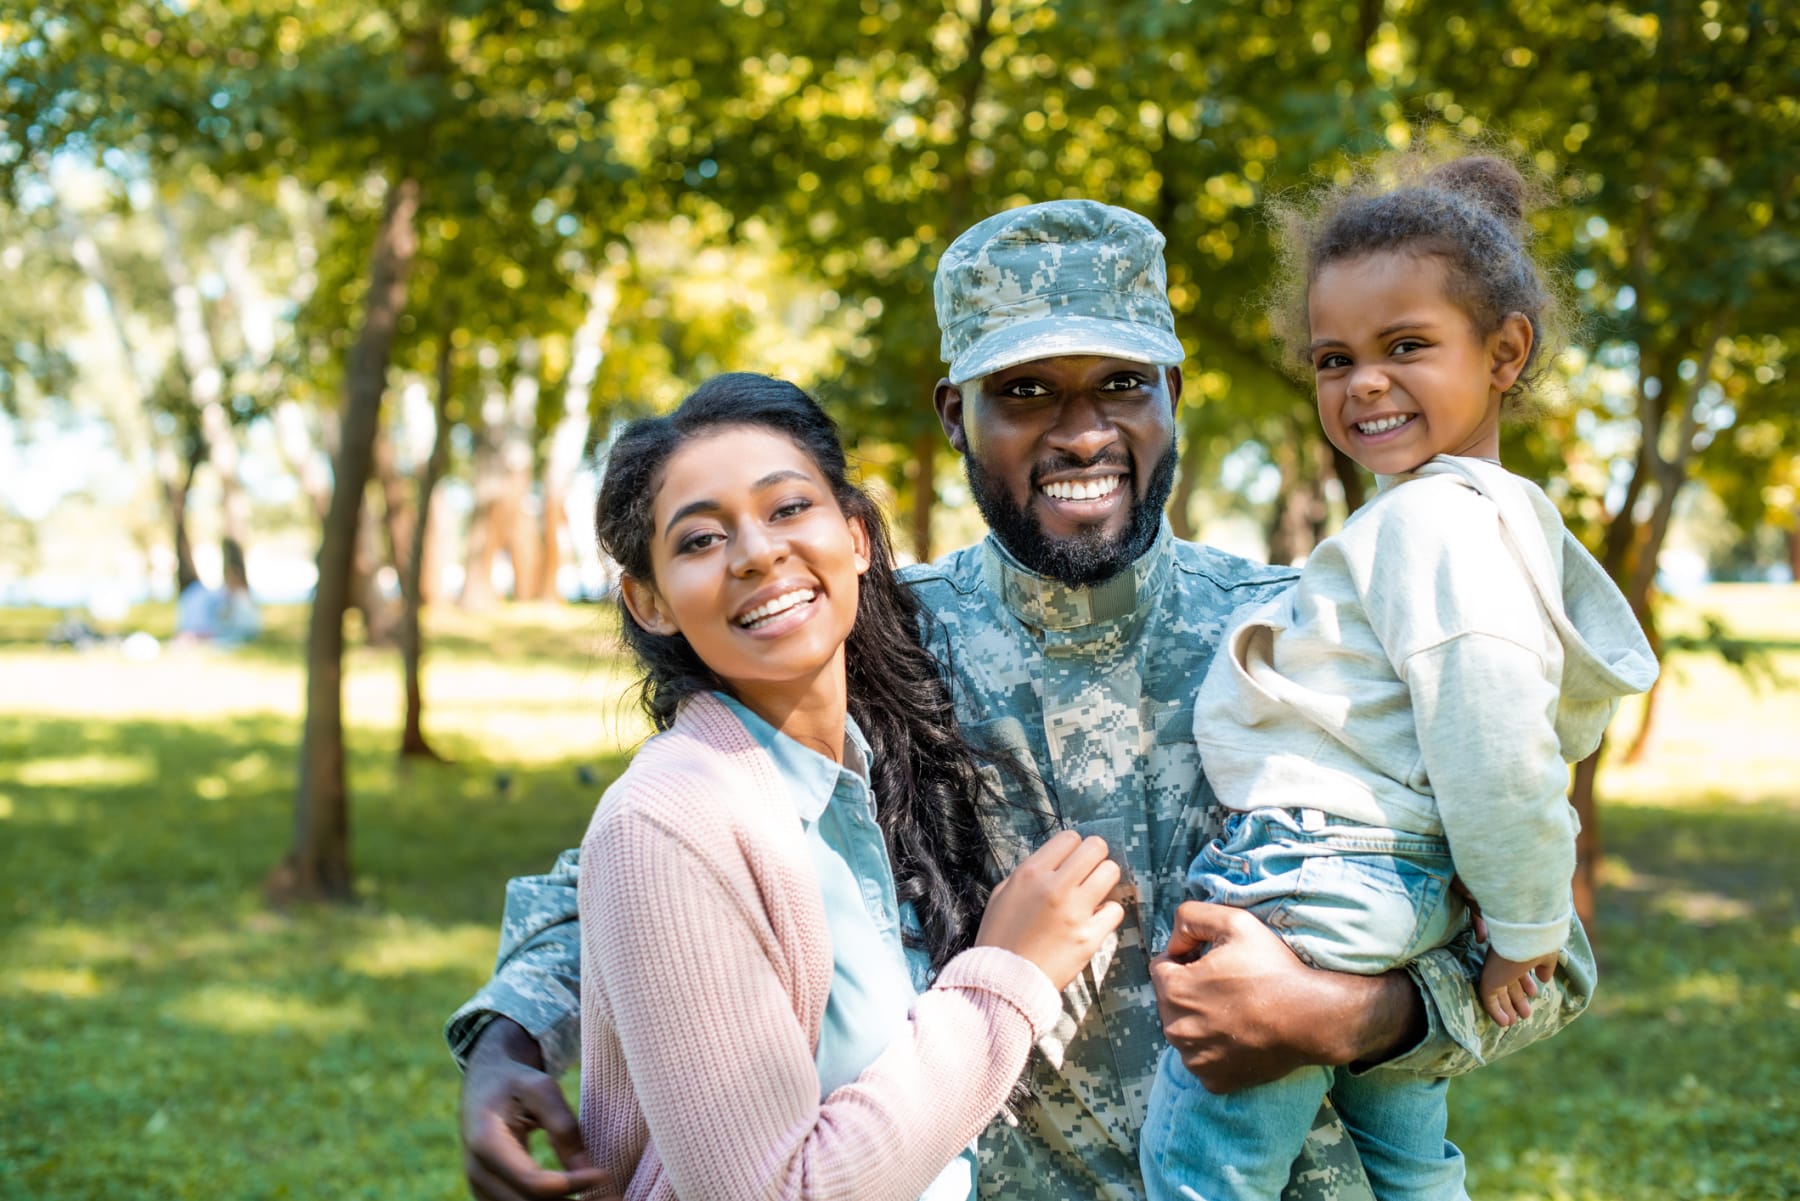 A happy military member poses with his family in a park.